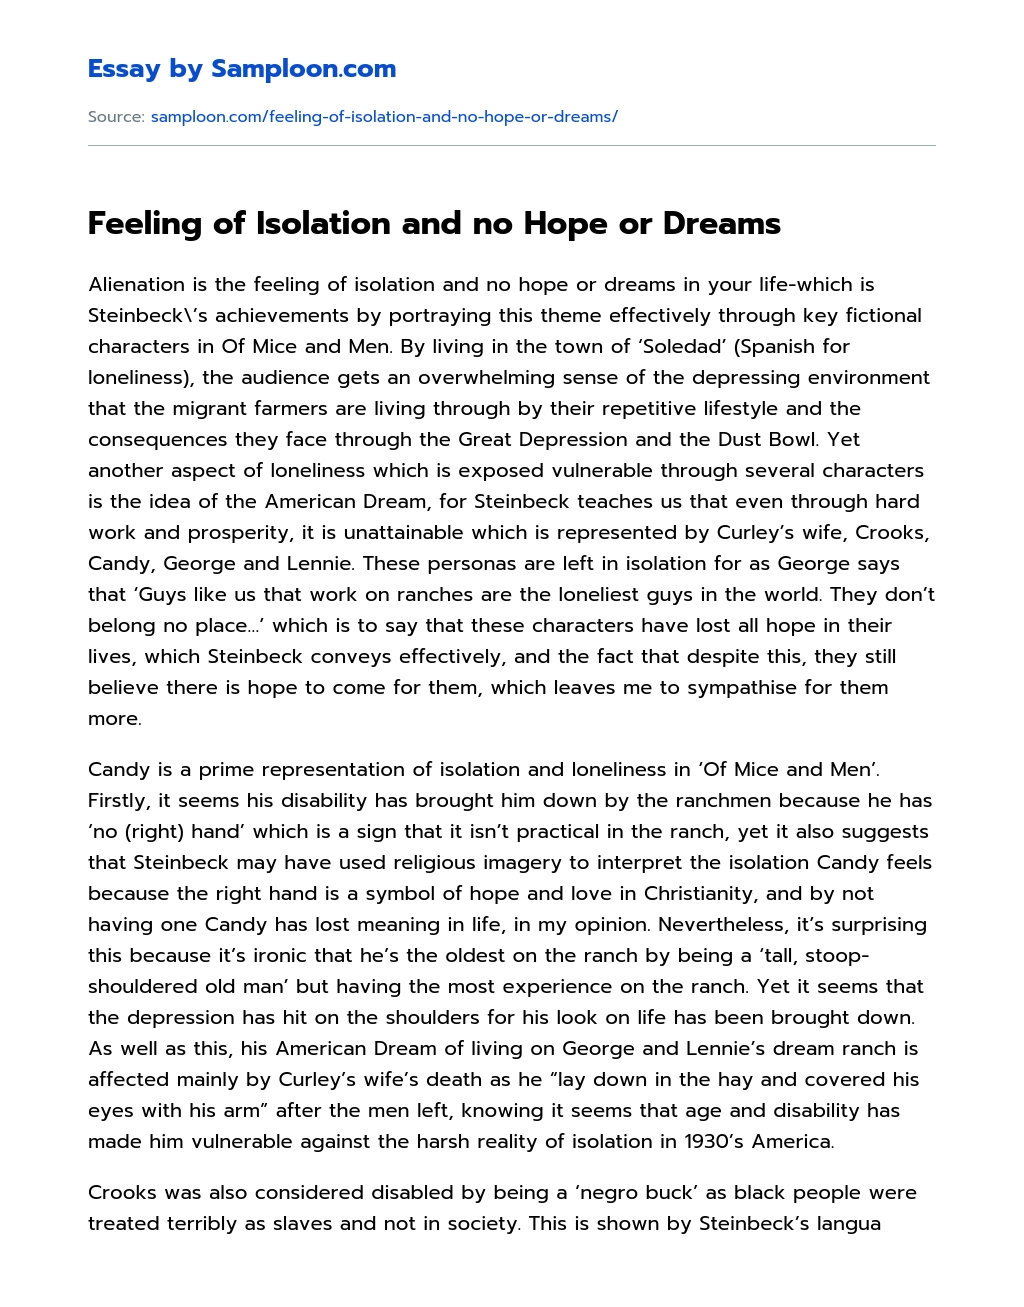 Feeling of Isolation and no Hope or Dreams essay